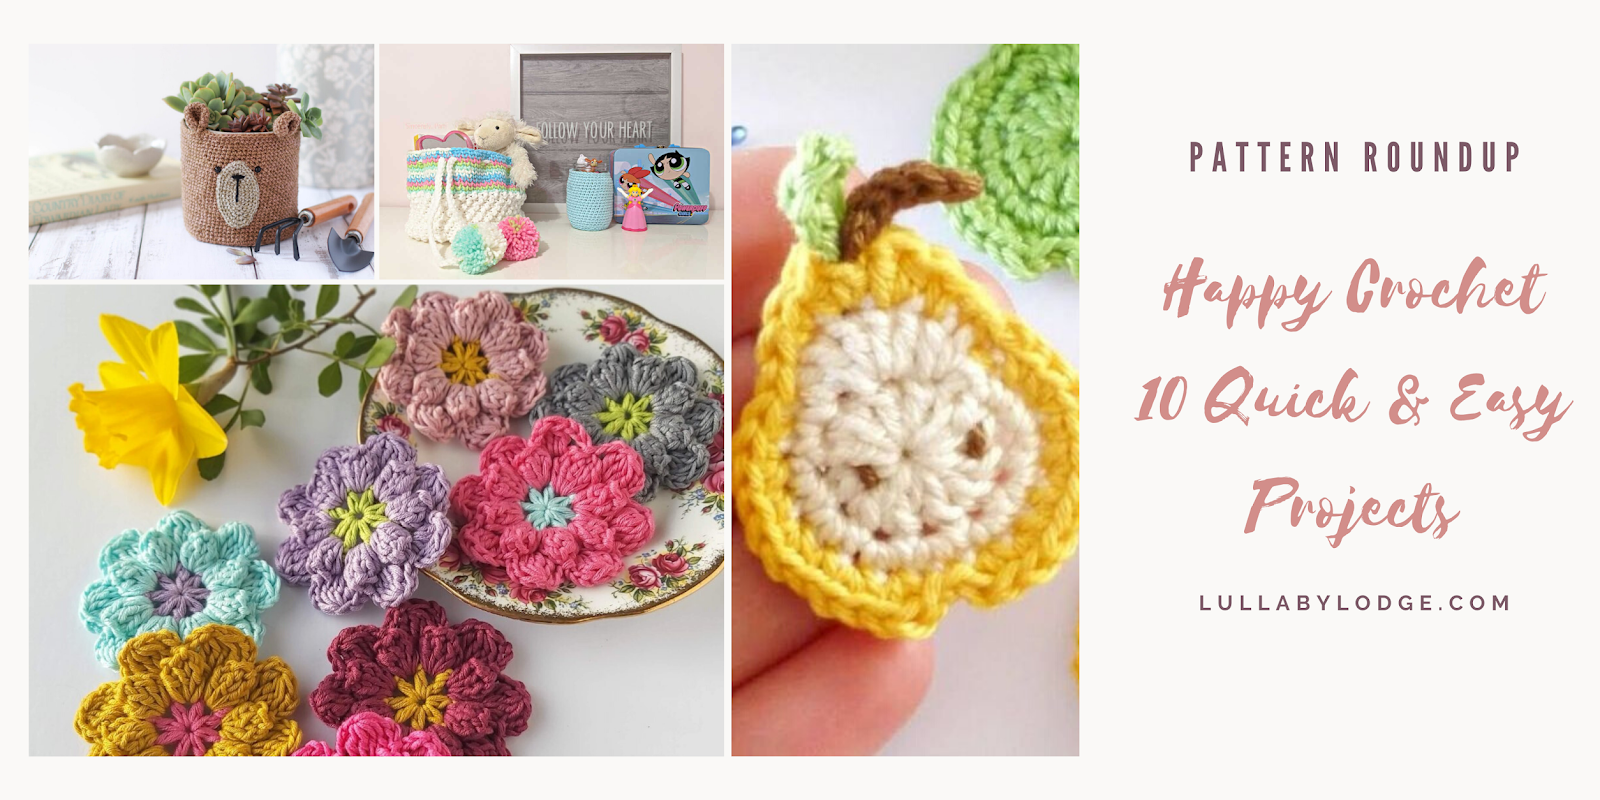 Lullaby Lodge: Happy Crochet - Ten quick & easy projects to make while you  are stuck indoors..